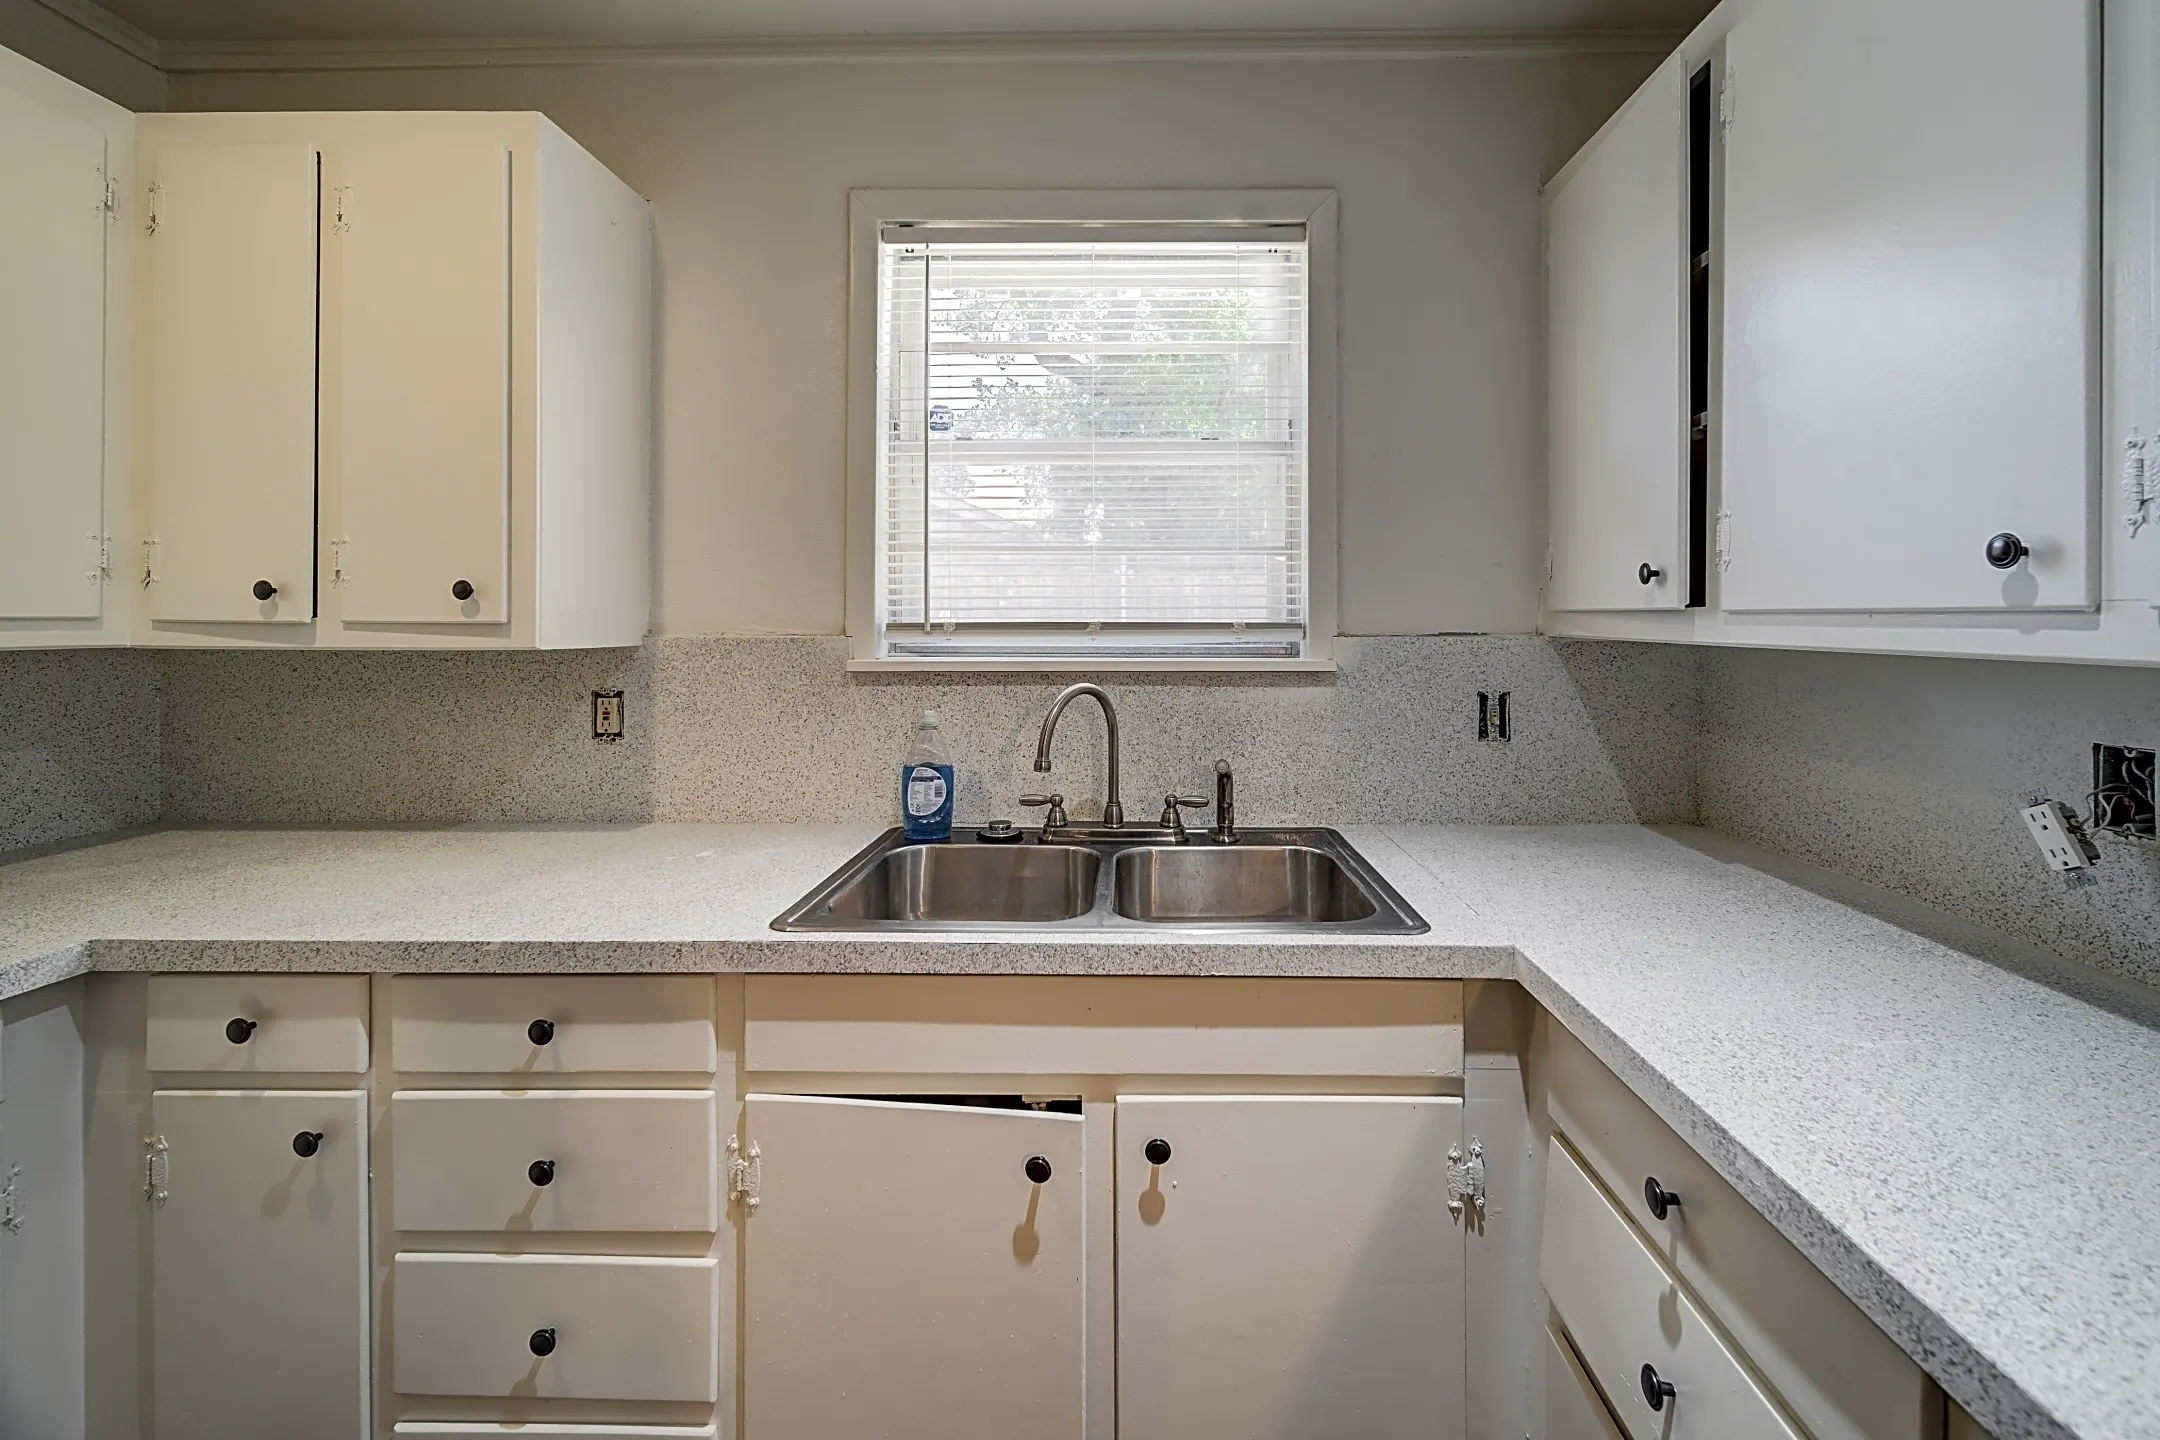 Kitchen - Room For Rent - Fort Worth, TX